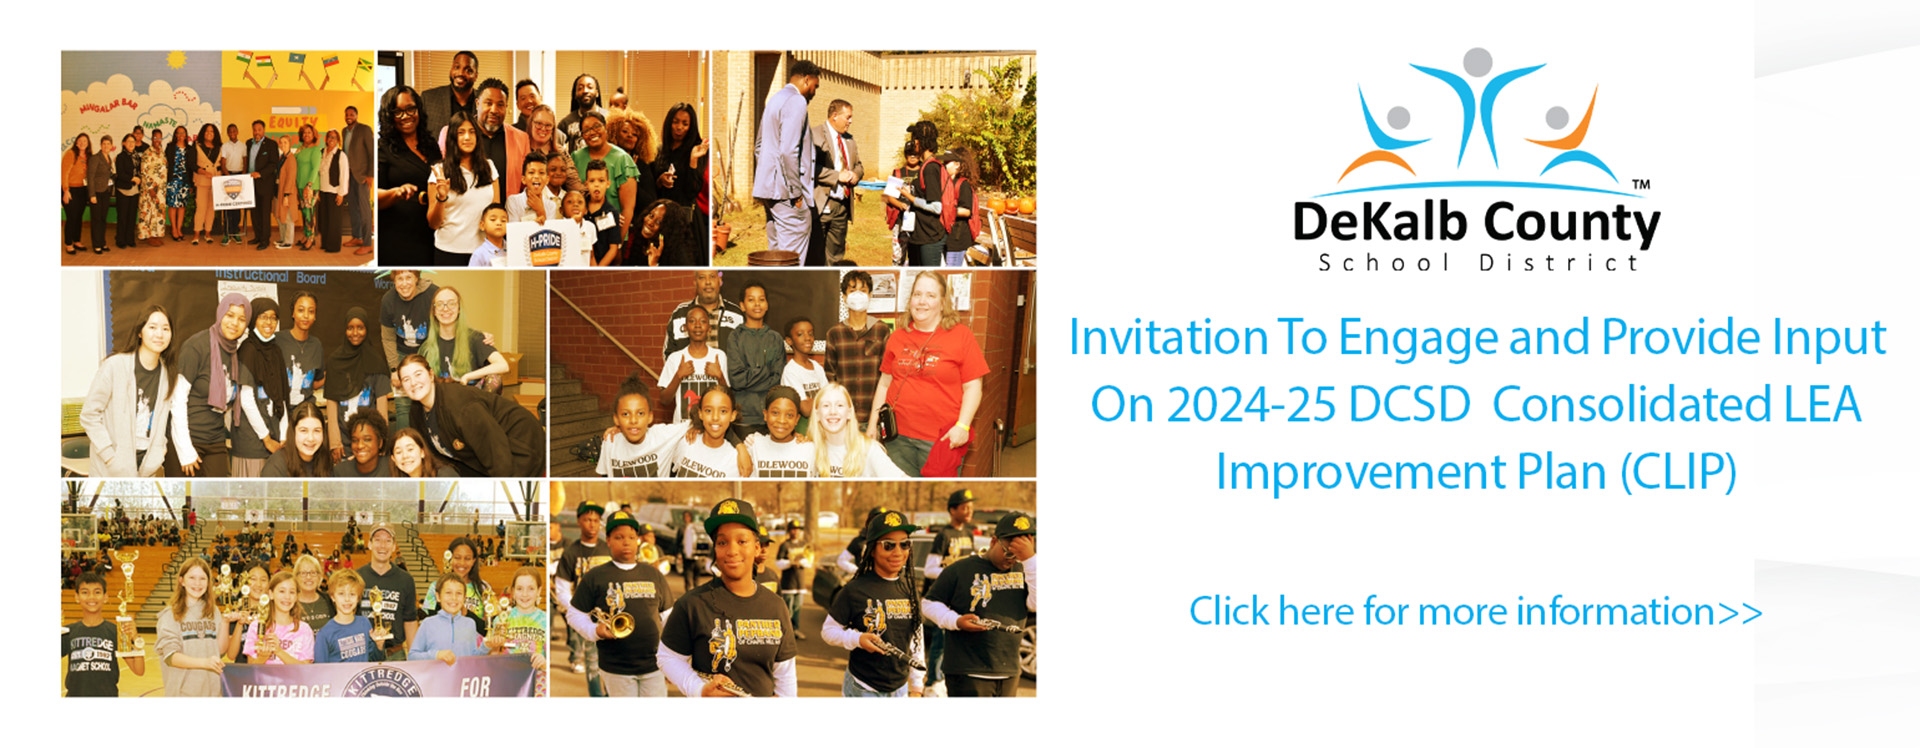 Invitation To Engage and Provide Input On 2024-25 DCSD Consolidated LEA Improvement Plan